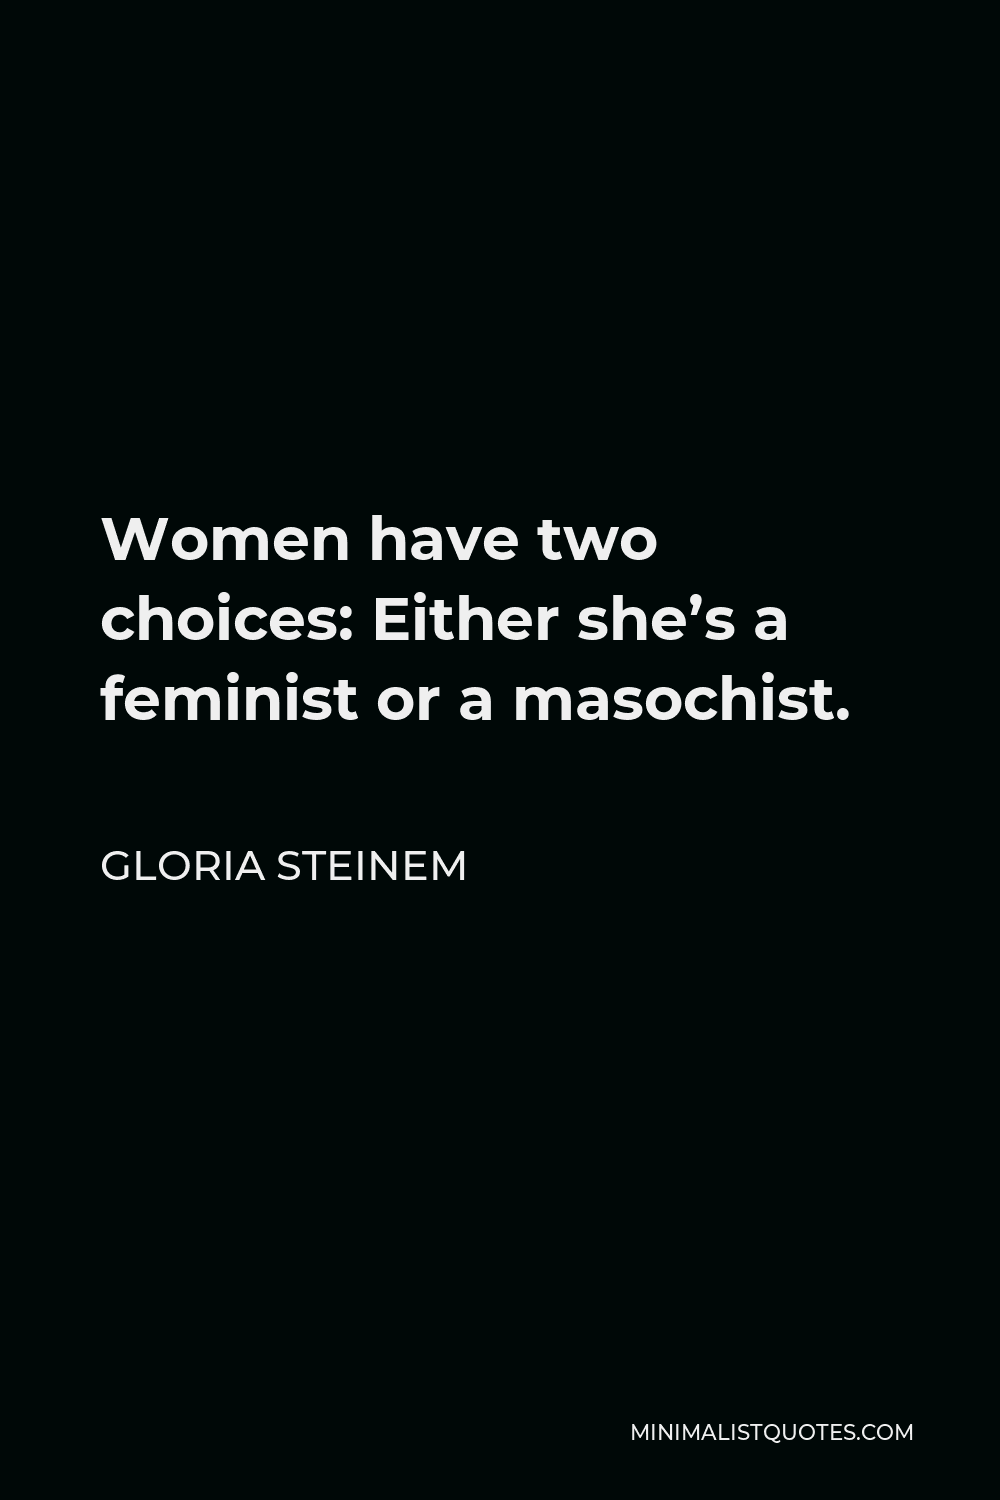 Gloria Steinem Quote - Women have two choices: Either she’s a feminist or a masochist.